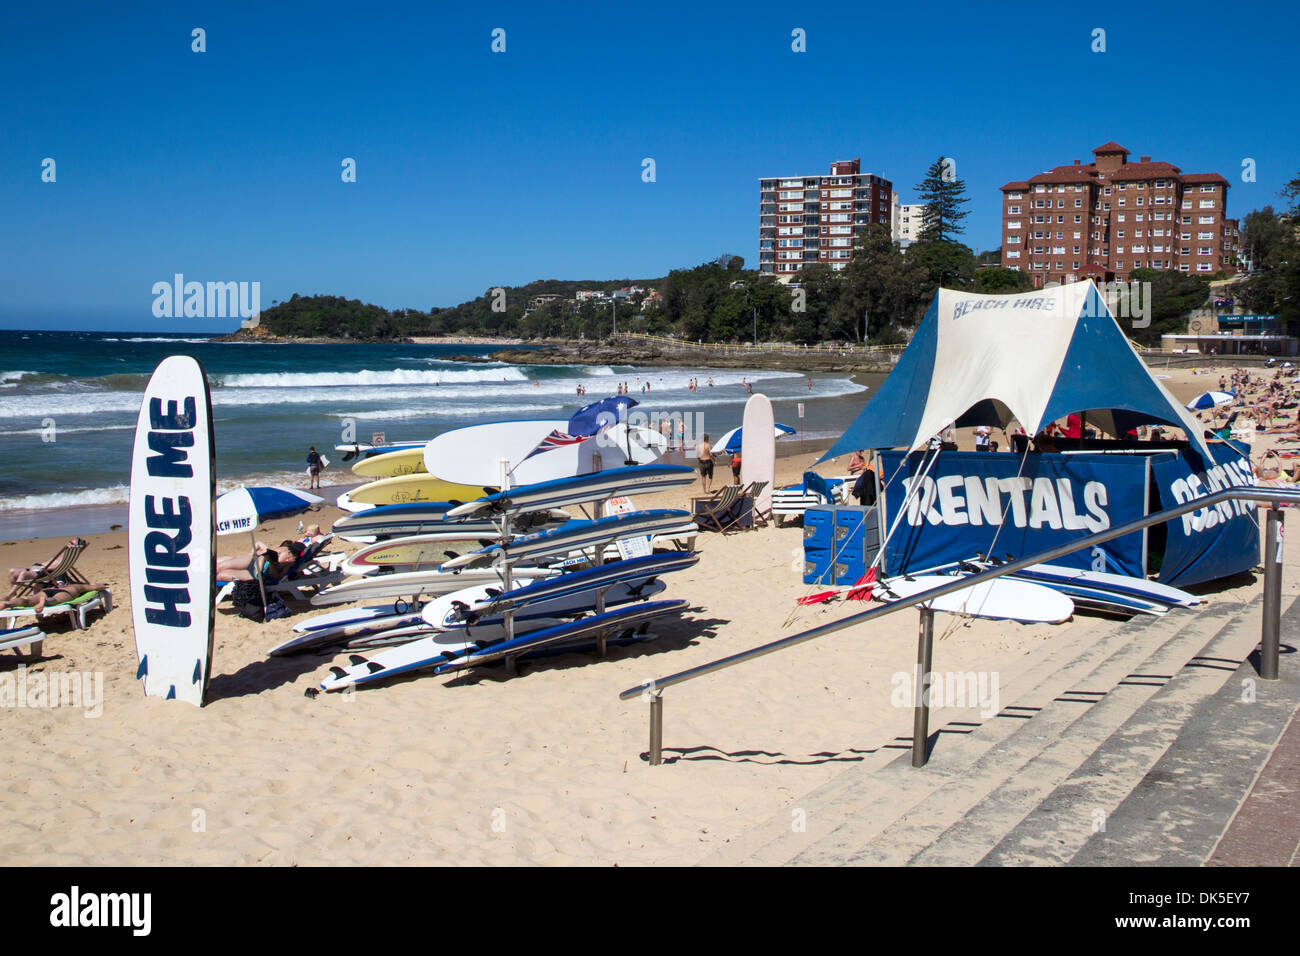 Surfboard rental on Manly Beach, Sydney, New South Wales, NSW, Australia Stock Photo